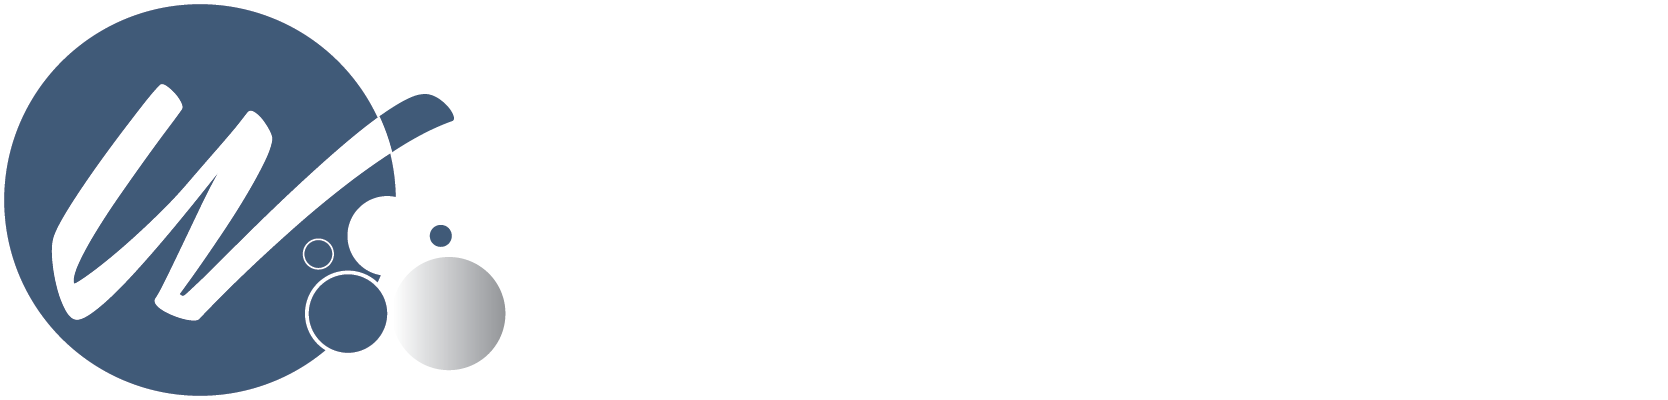 Western Geotechnical Laboratory Services LOGO 6